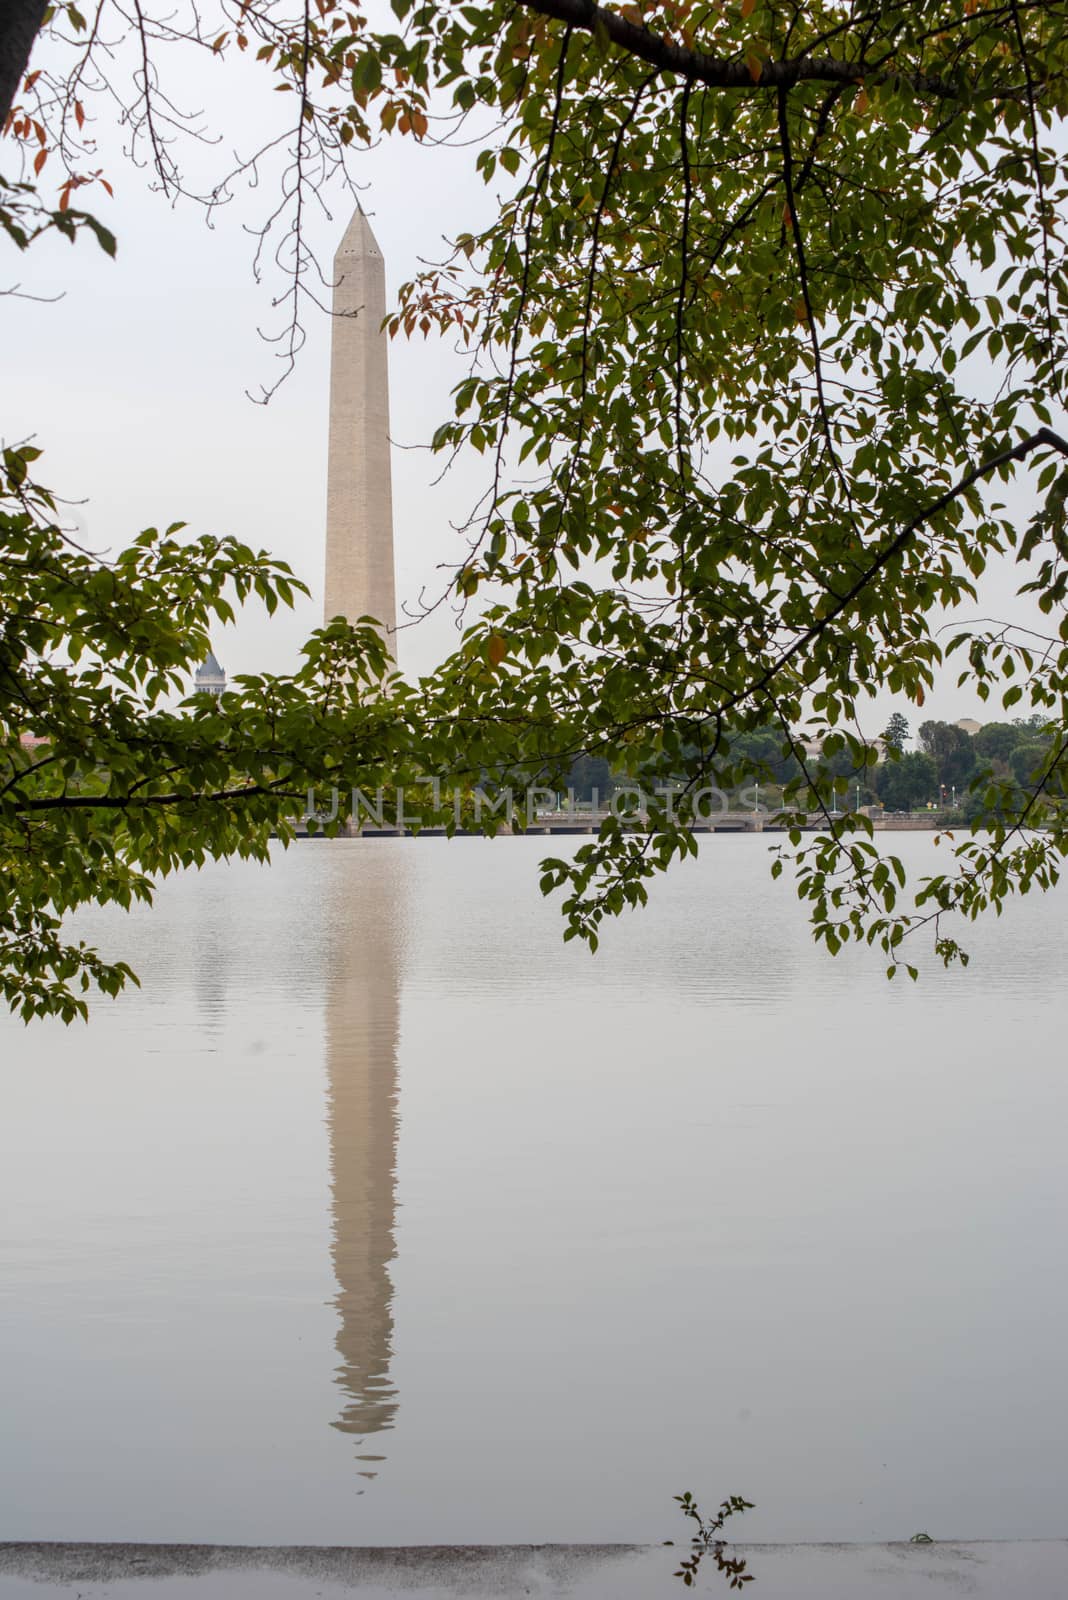 Washington Monument seen through green leaves and trees, and reflected in water. Gray sky gives a somber background tone with playful leaves in foreground